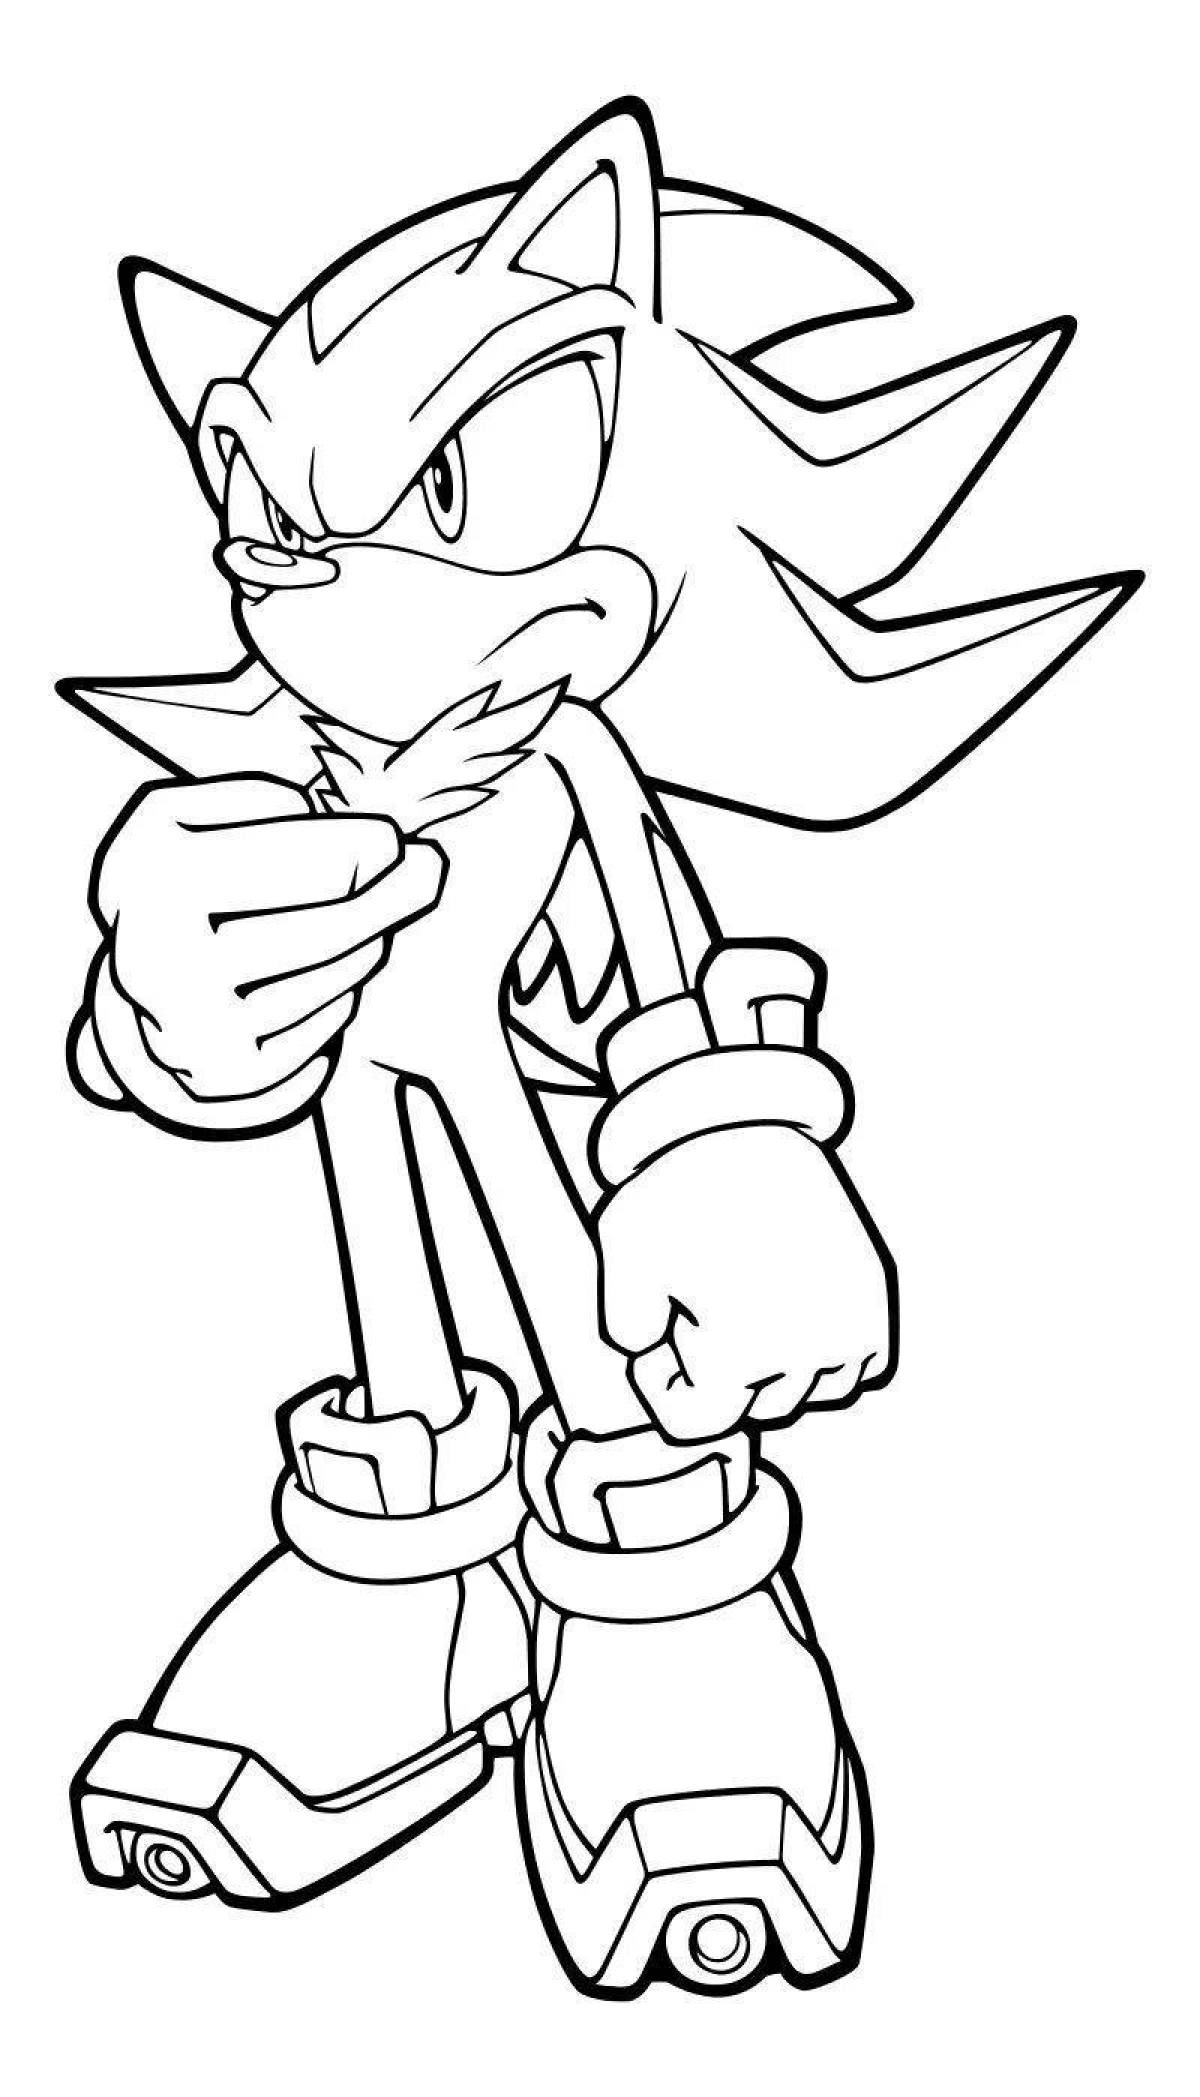 Fun blue sonic coloring page